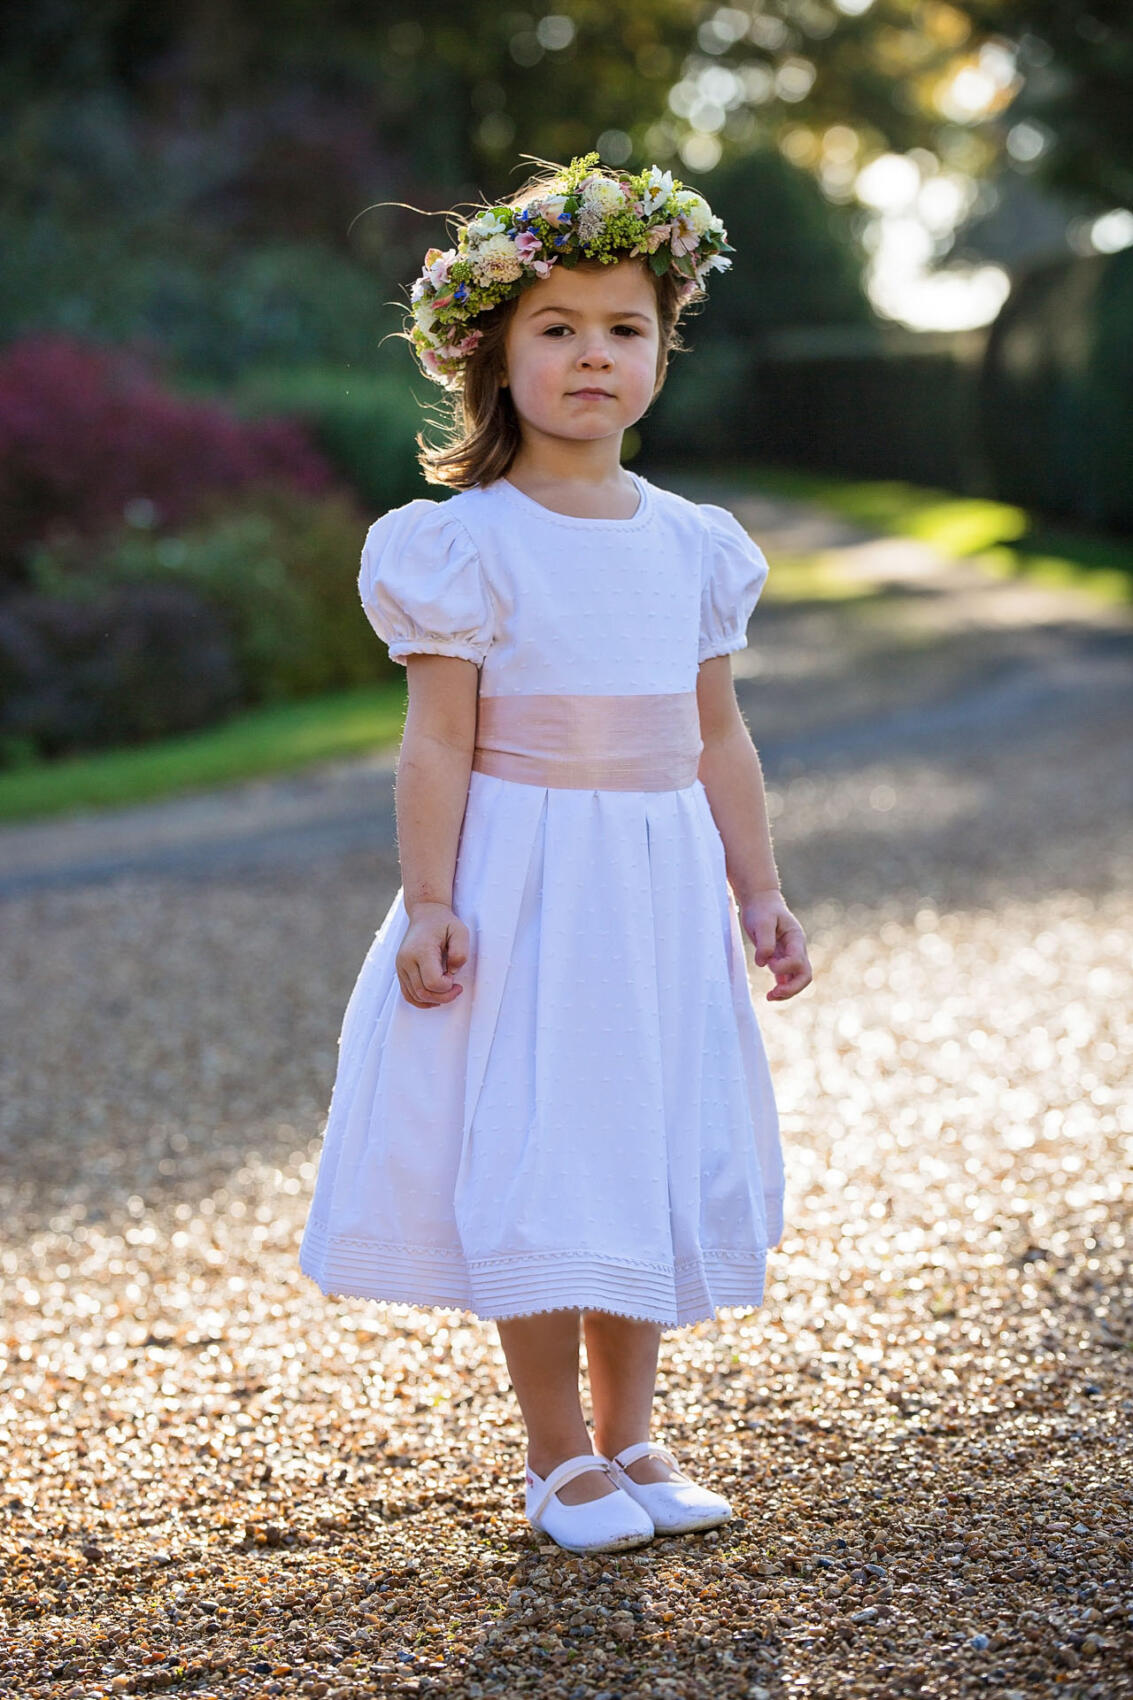 Traditional flowergirl outfit, Amelia Brennan